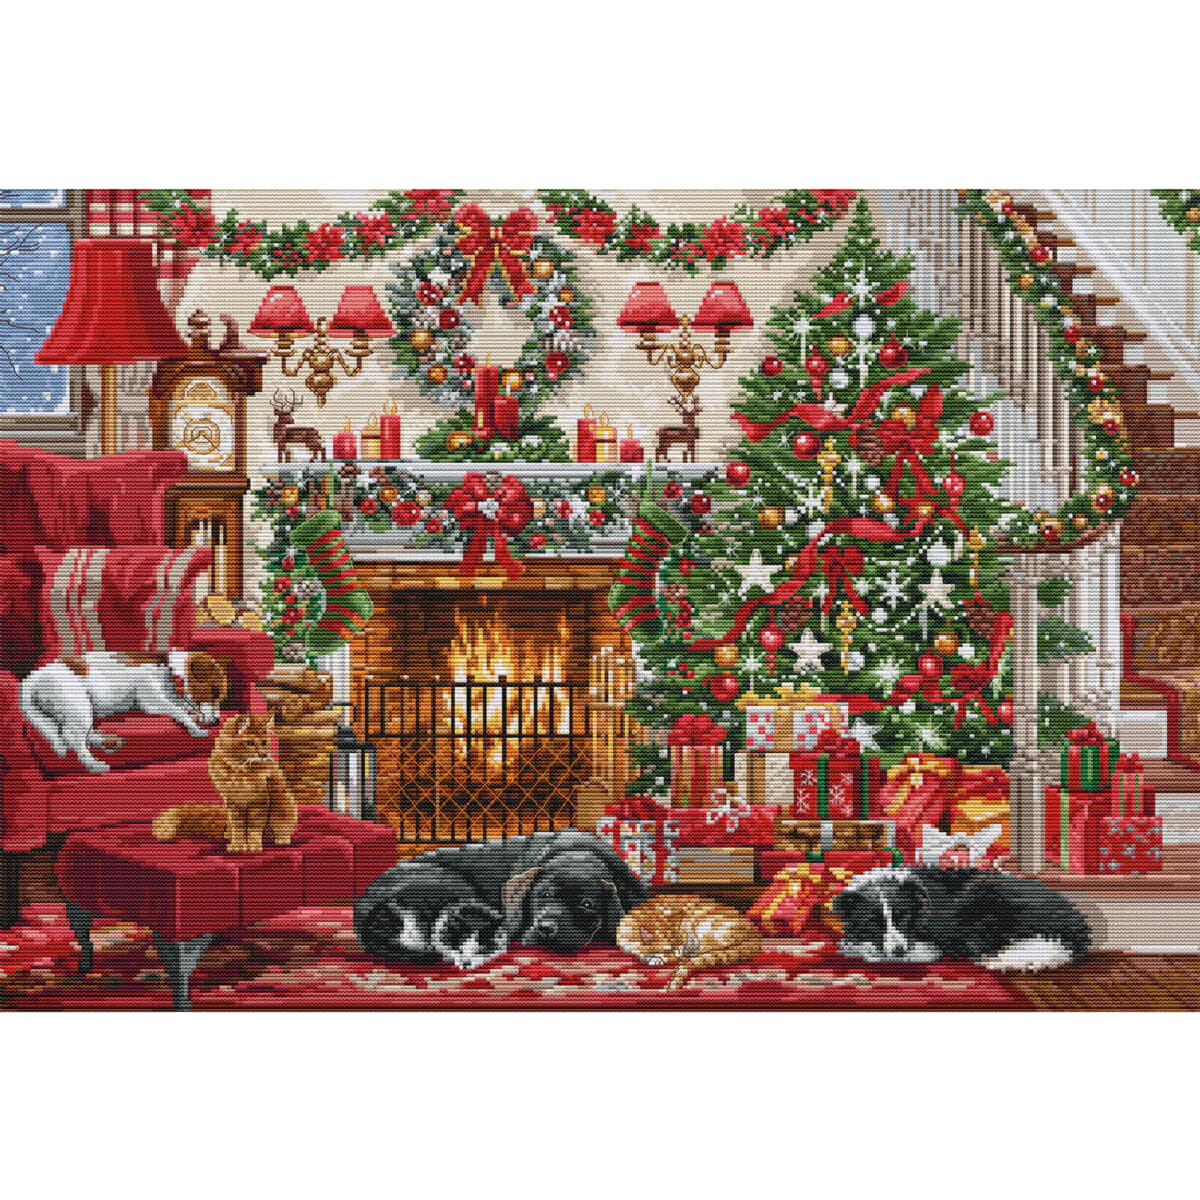 A cozy Christmas scene with a decorated Christmas tree...